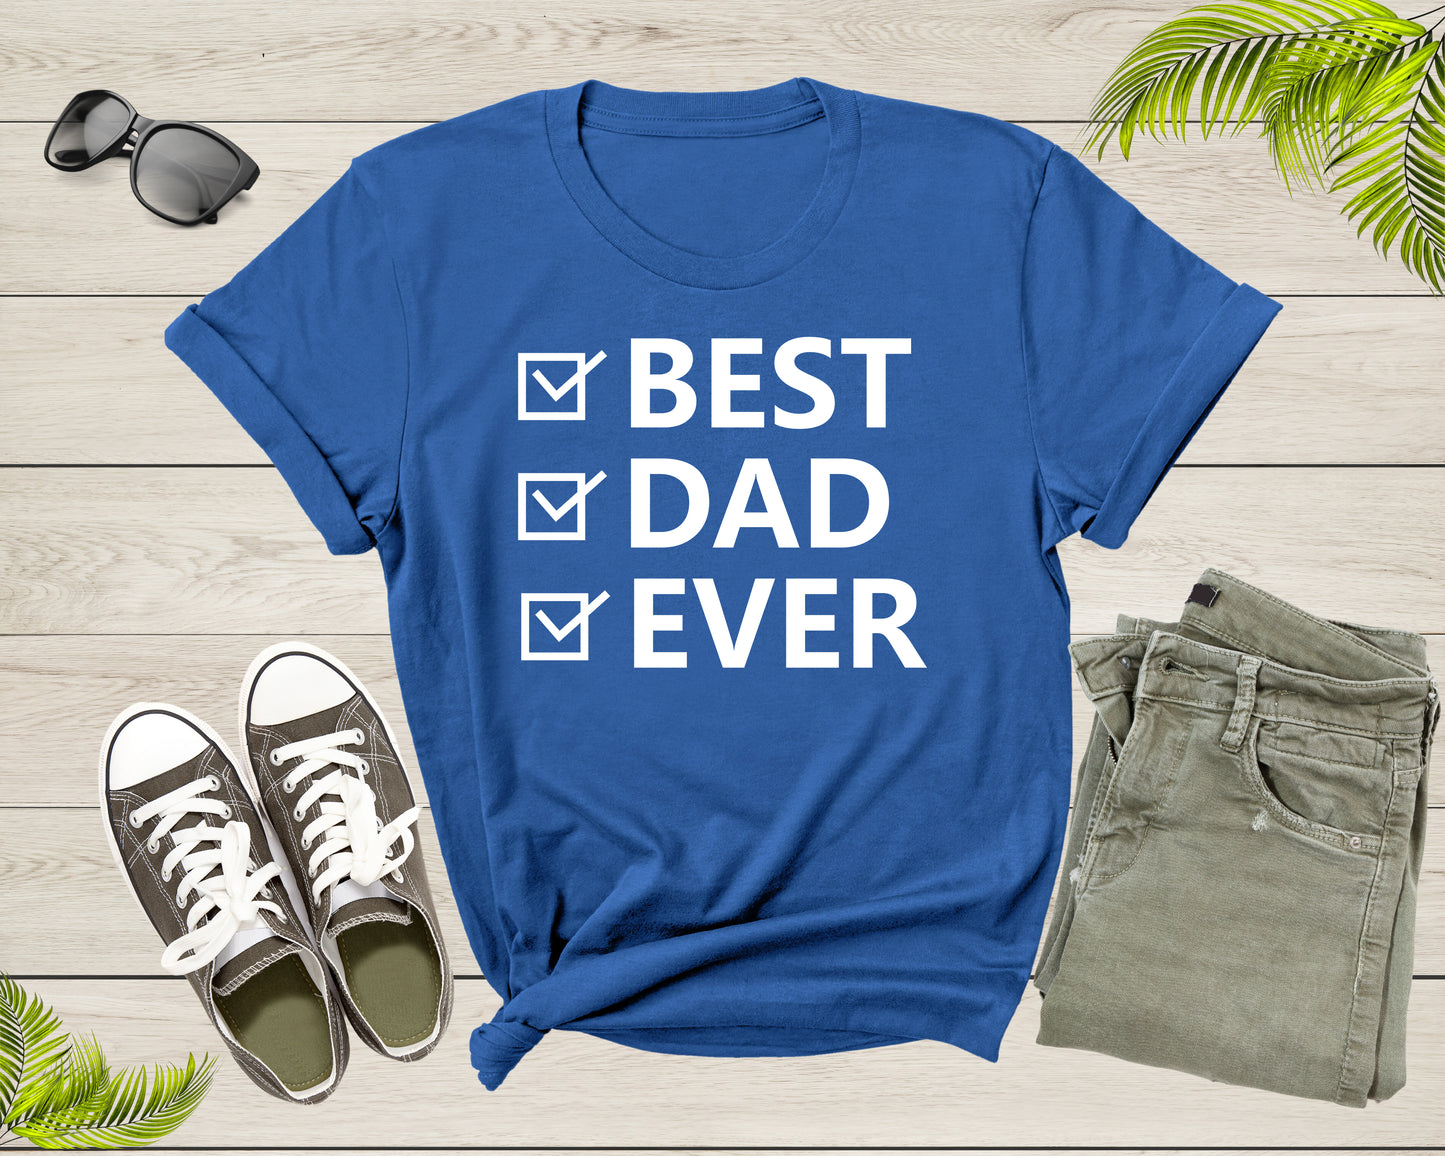 Best Dad Ever Shirt For Men Fathers Day Father Grandfather Grandpa Daddy Gift Tshirt Incredible Dad Funny Birthday Present Graphic T-shirt